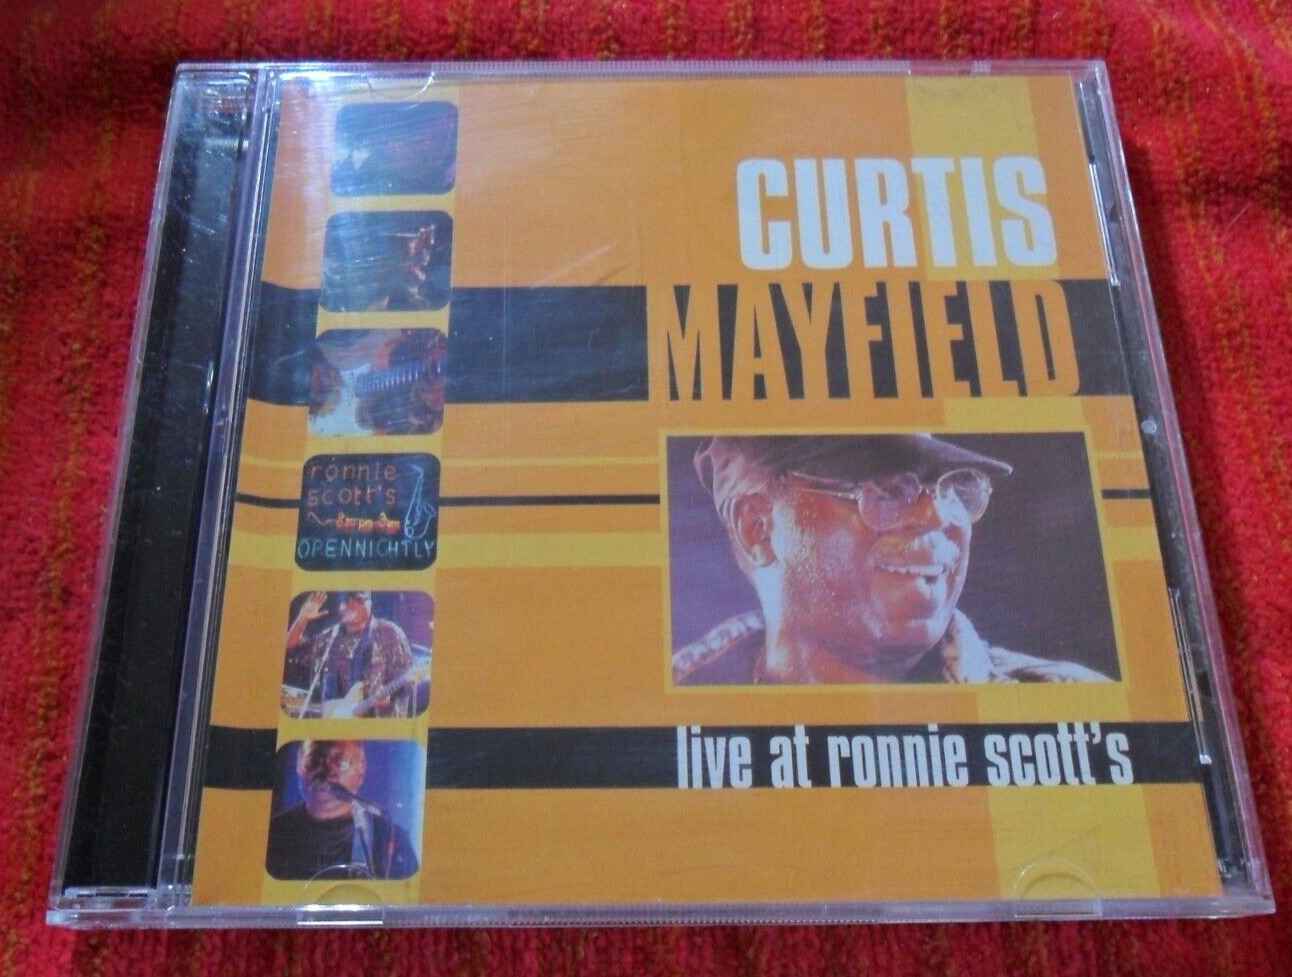 2001 CURTIS MAYFIELD LIVE at RONNIE SCOTT\'S 1988 CD & DVD SET - IMPRESSIONS